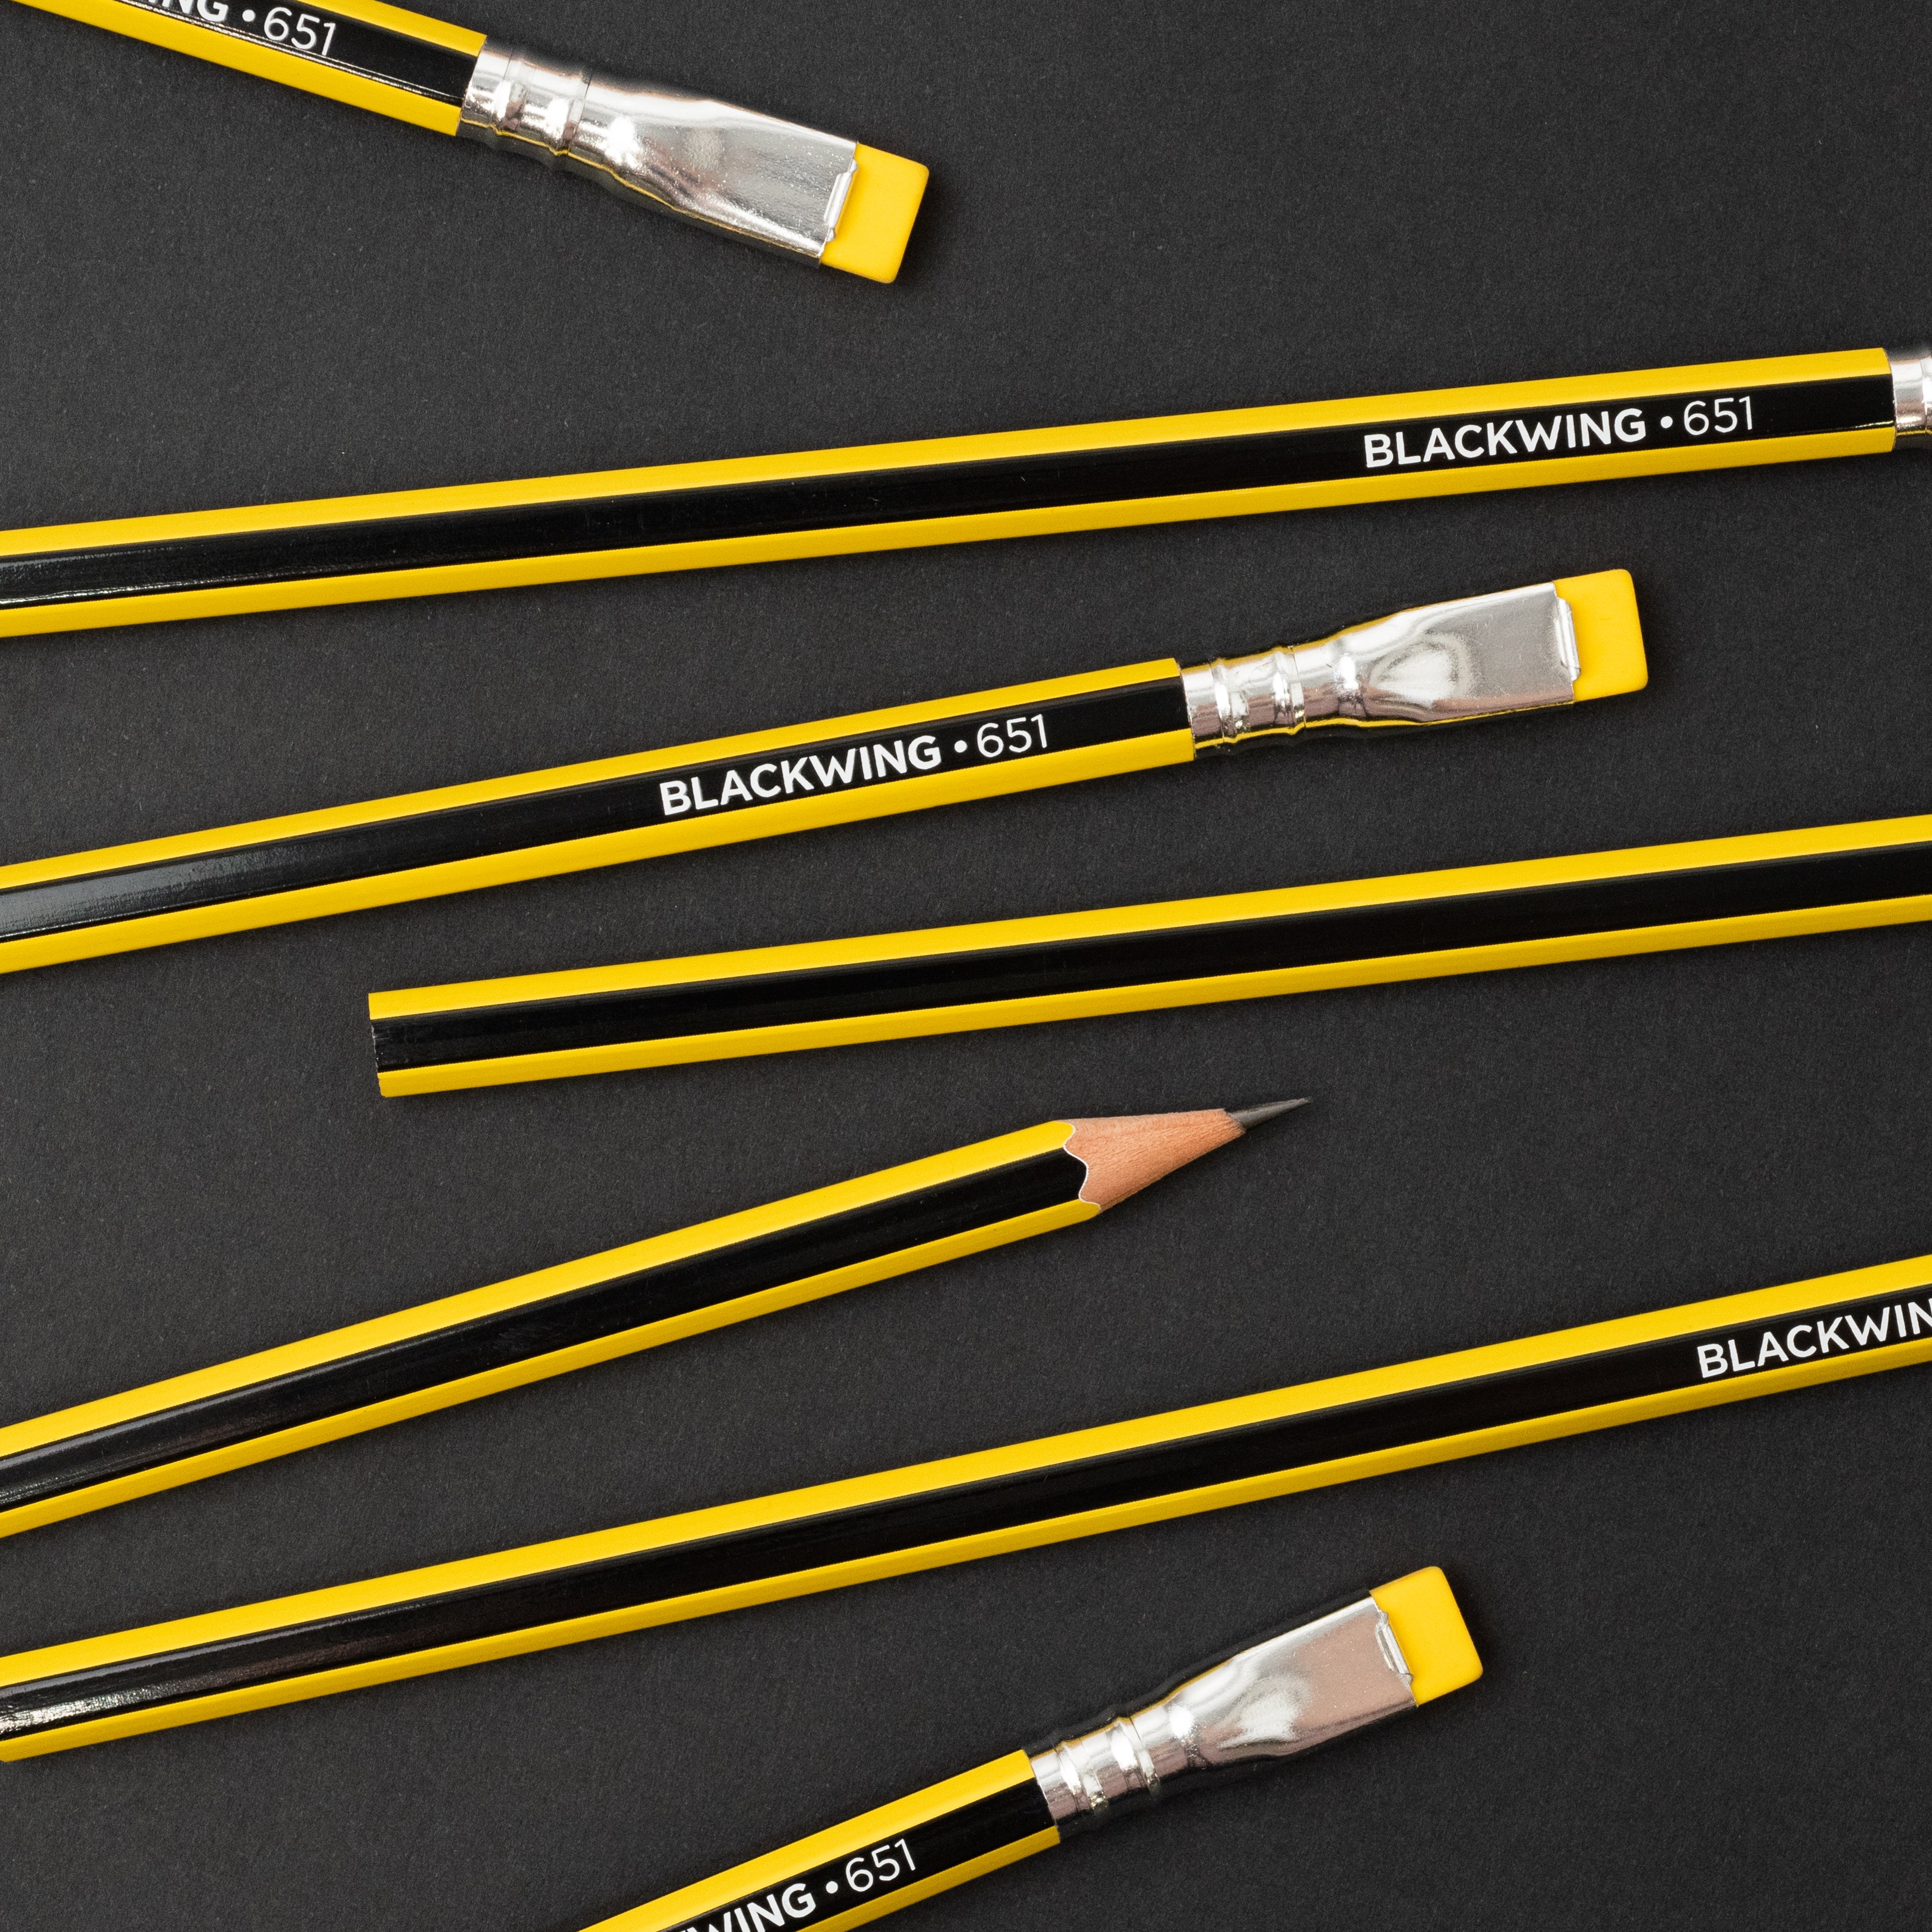 A group of yellow and Blackwing Volume 651 pencils on a dark surface.